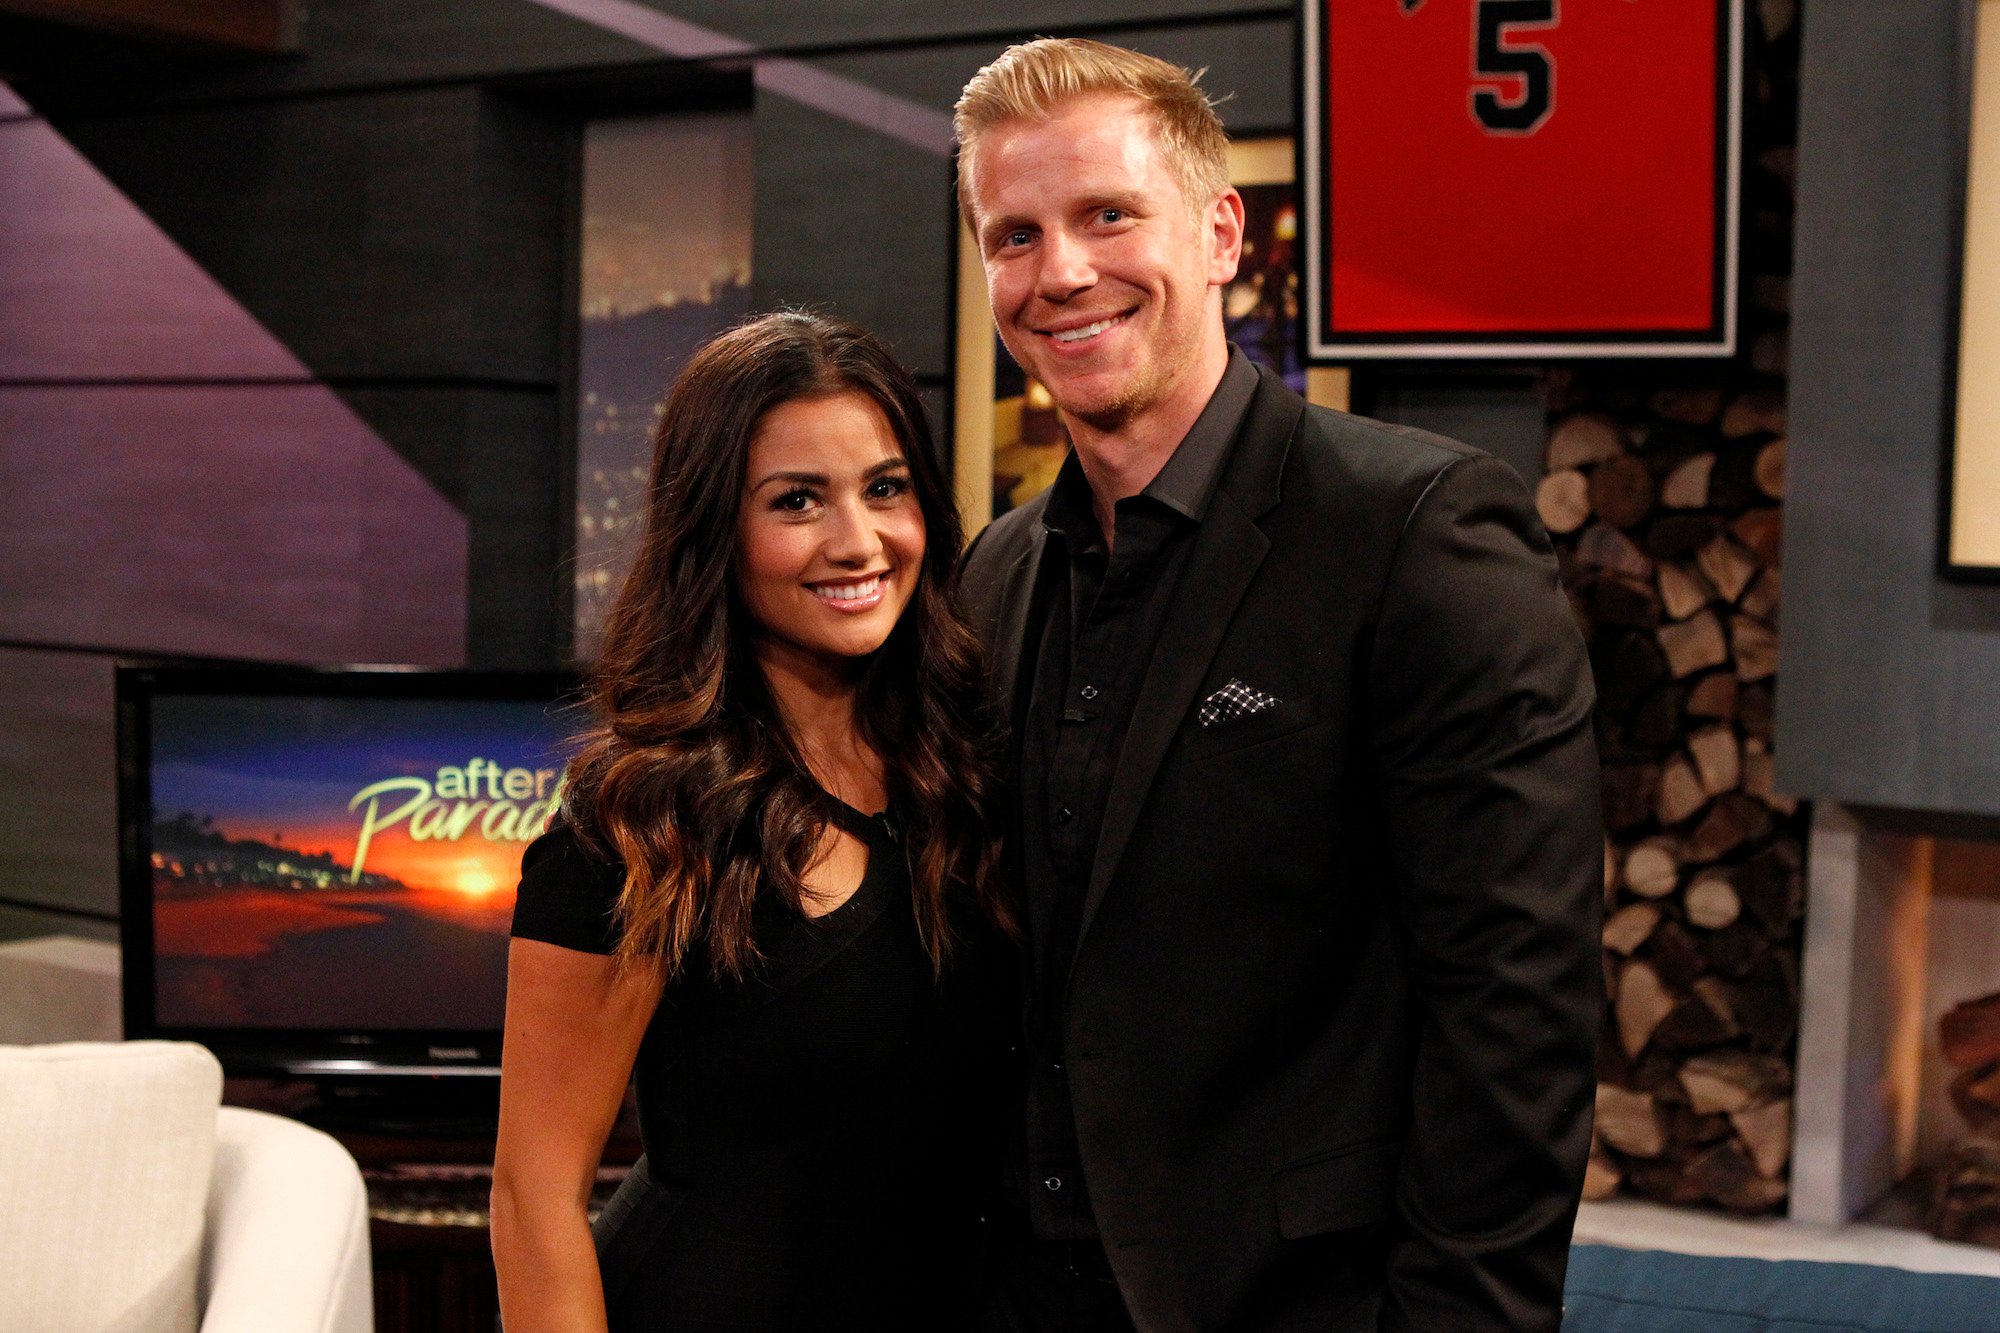 Sean Lowe and Catherine Giudici Lowe wearing matching black attire to the 'Bachelor In Paradise: After Paradise' after show.